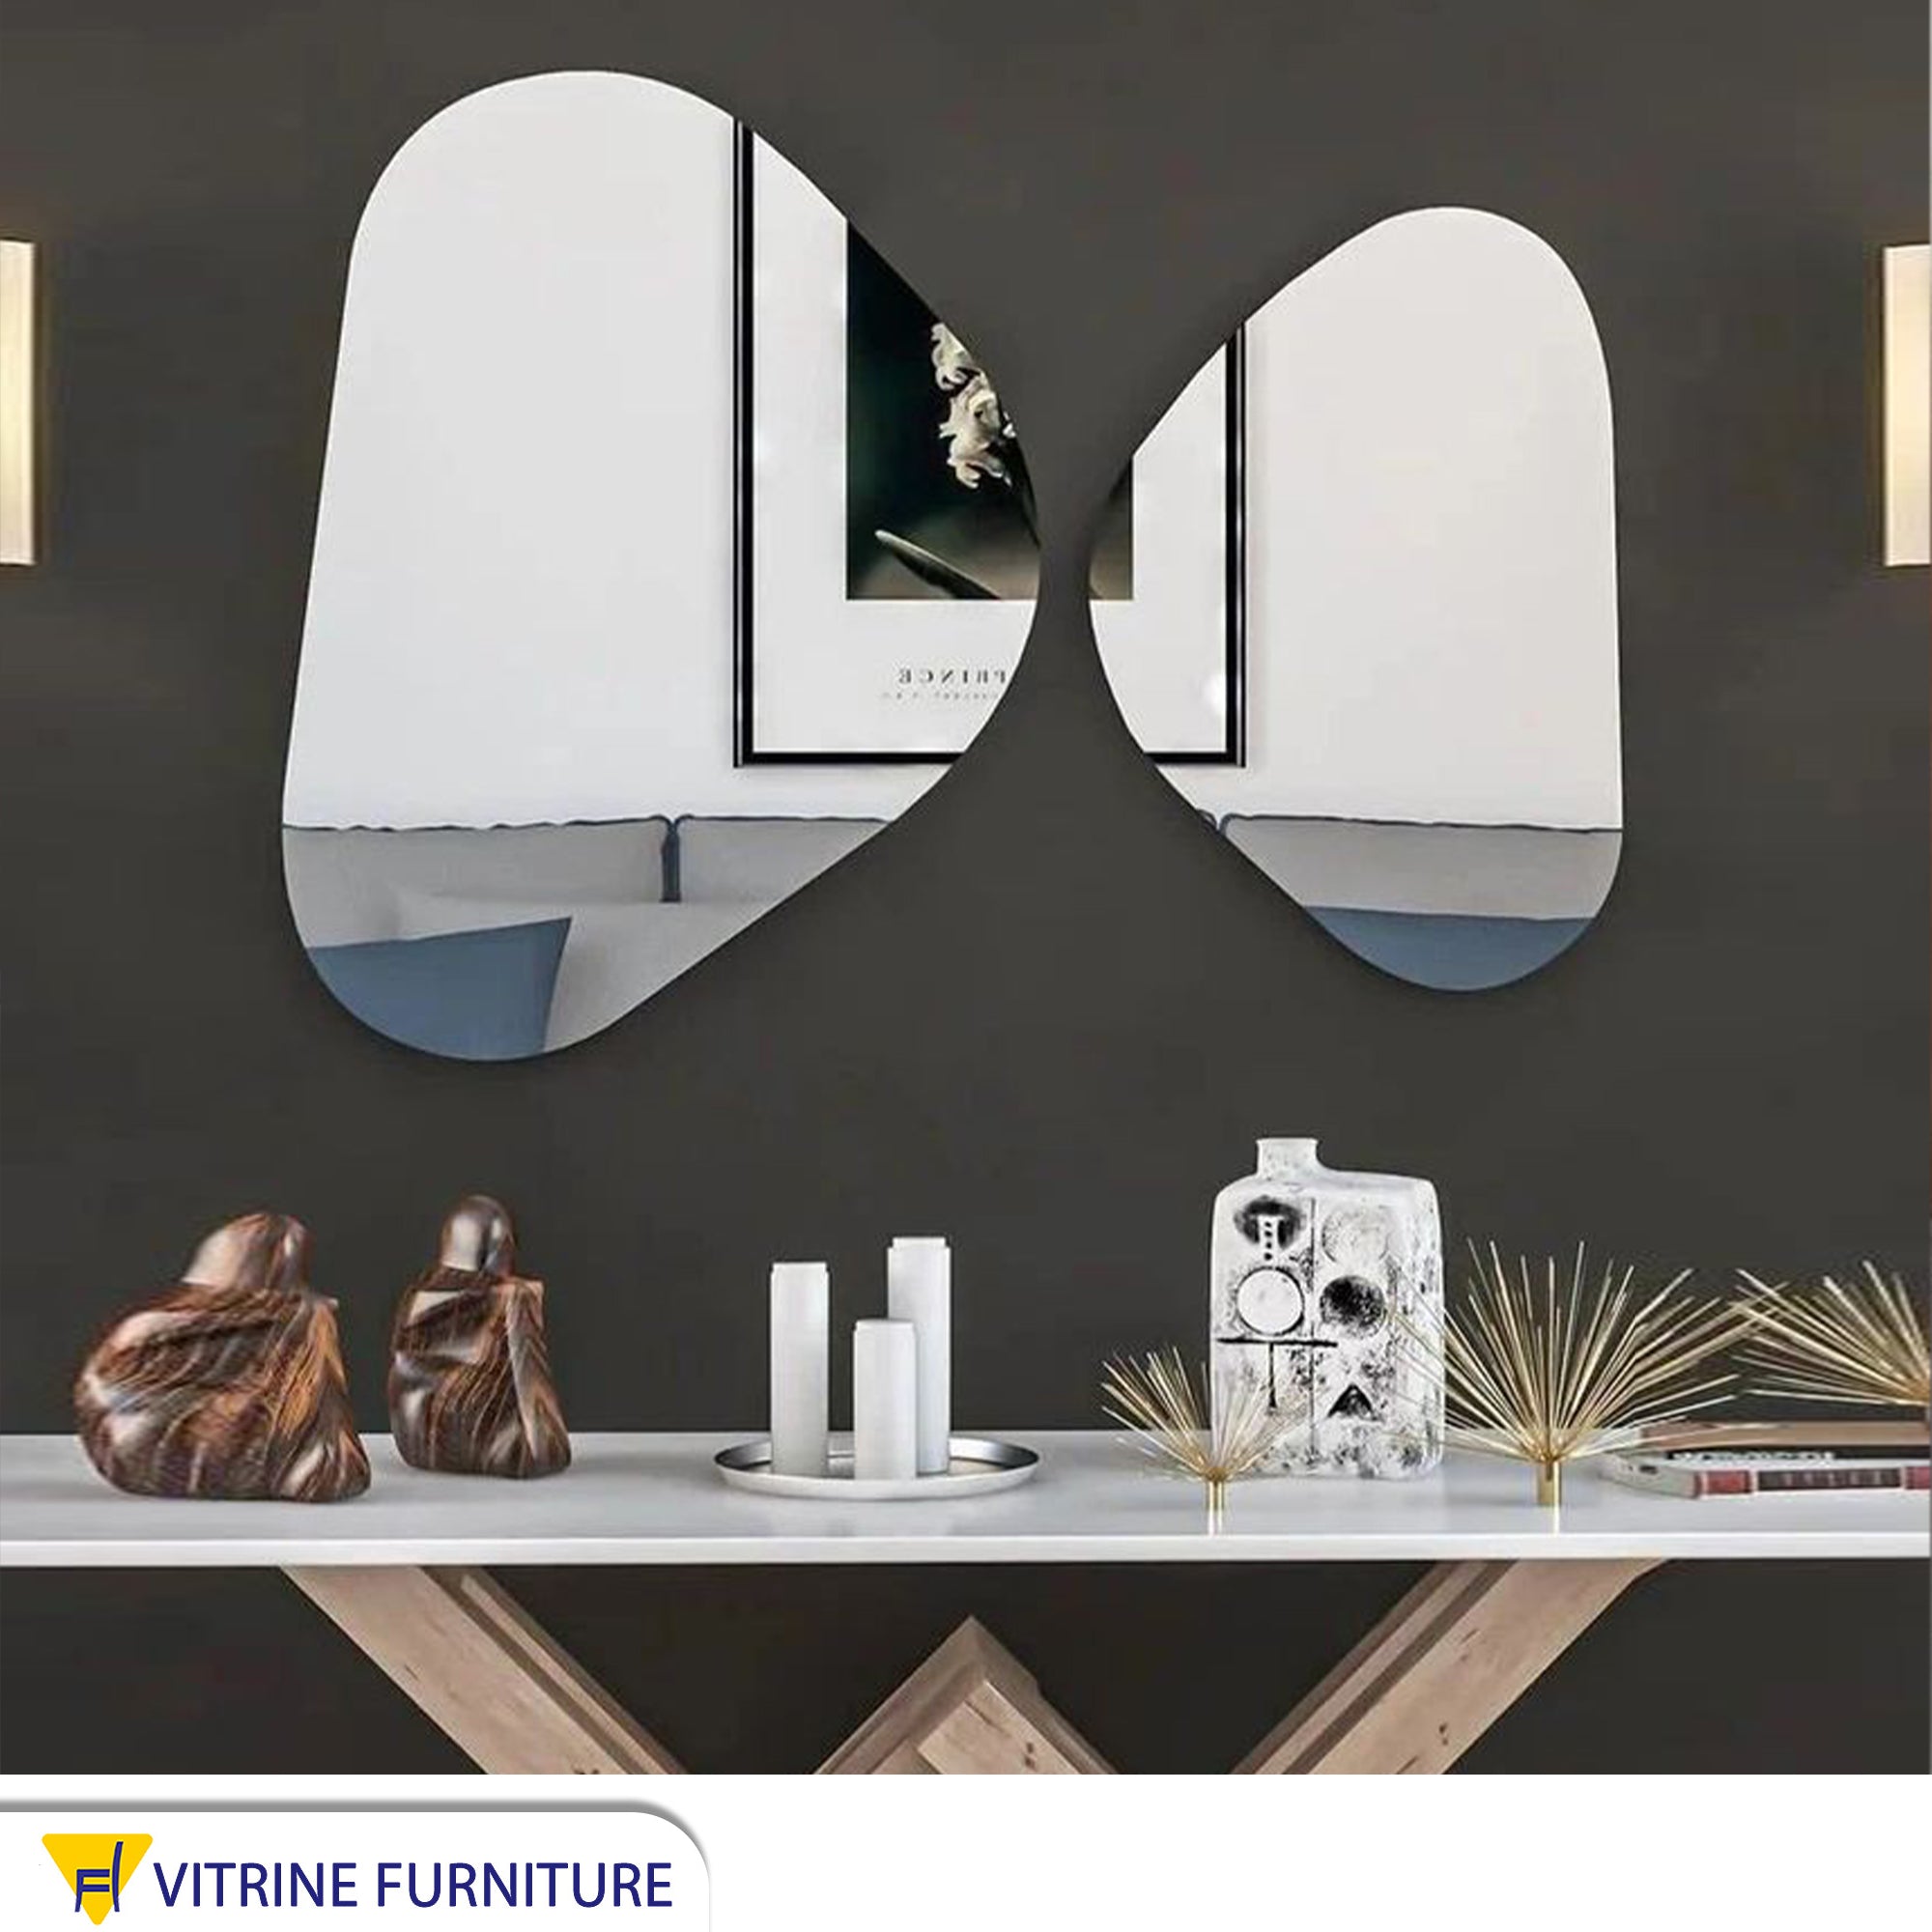 Two-piece mirror for a complete shape